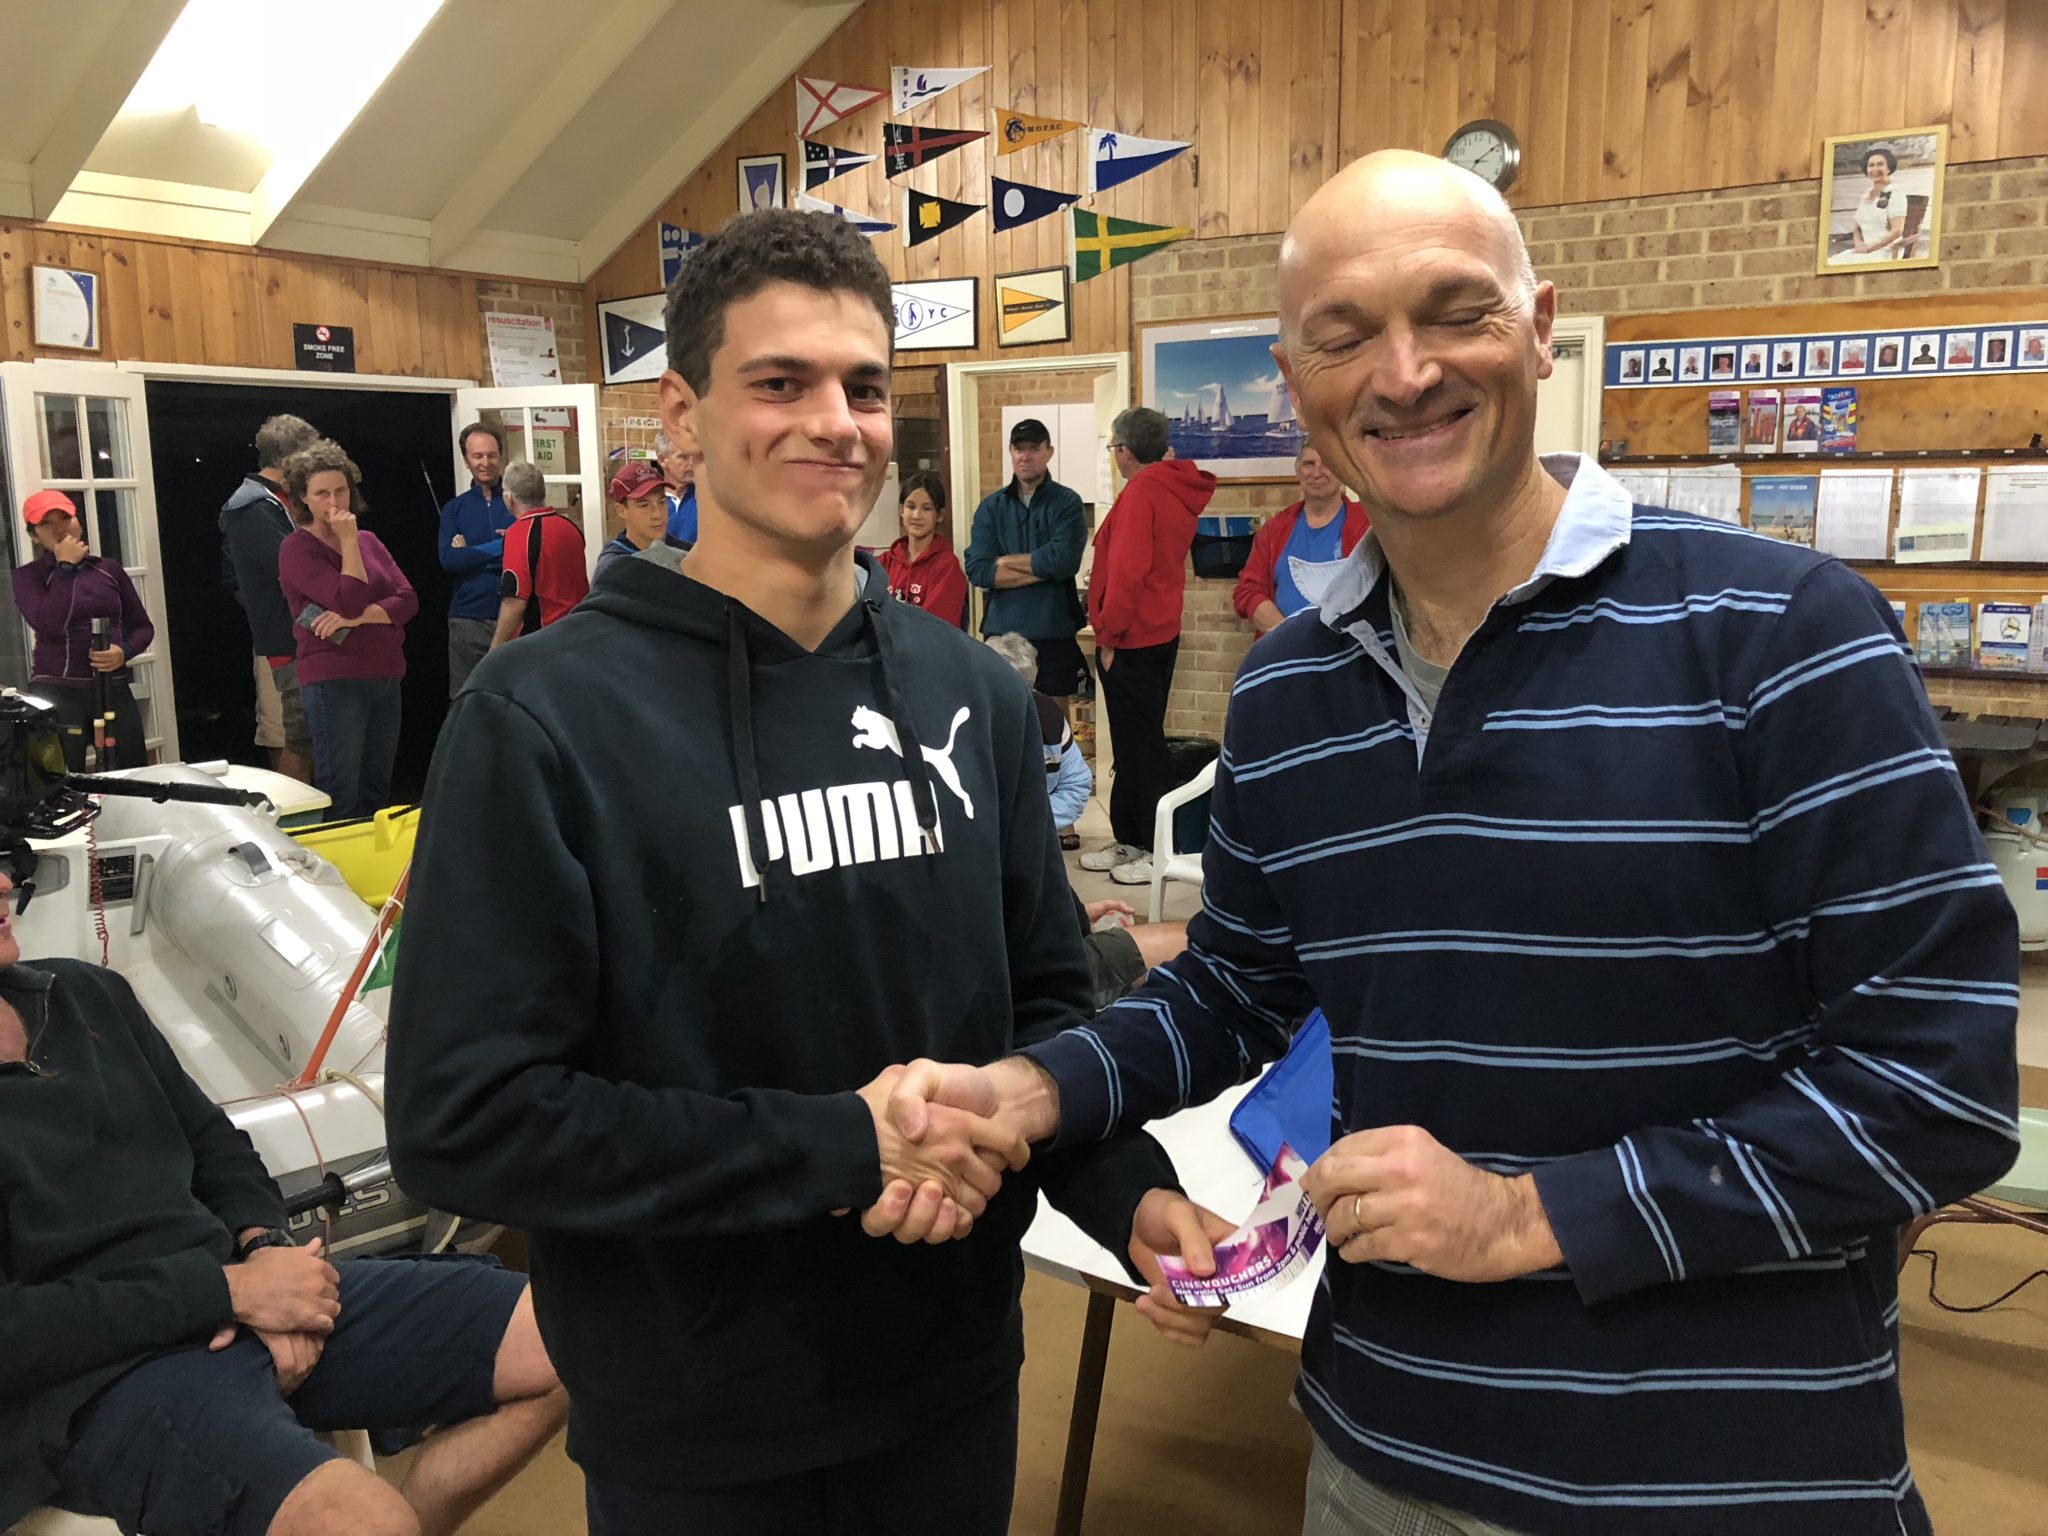 Tuesday 1st May 2018 : Tonight’s photo shows Gianluca Cottino presenting his father Carlo with a movie voucher